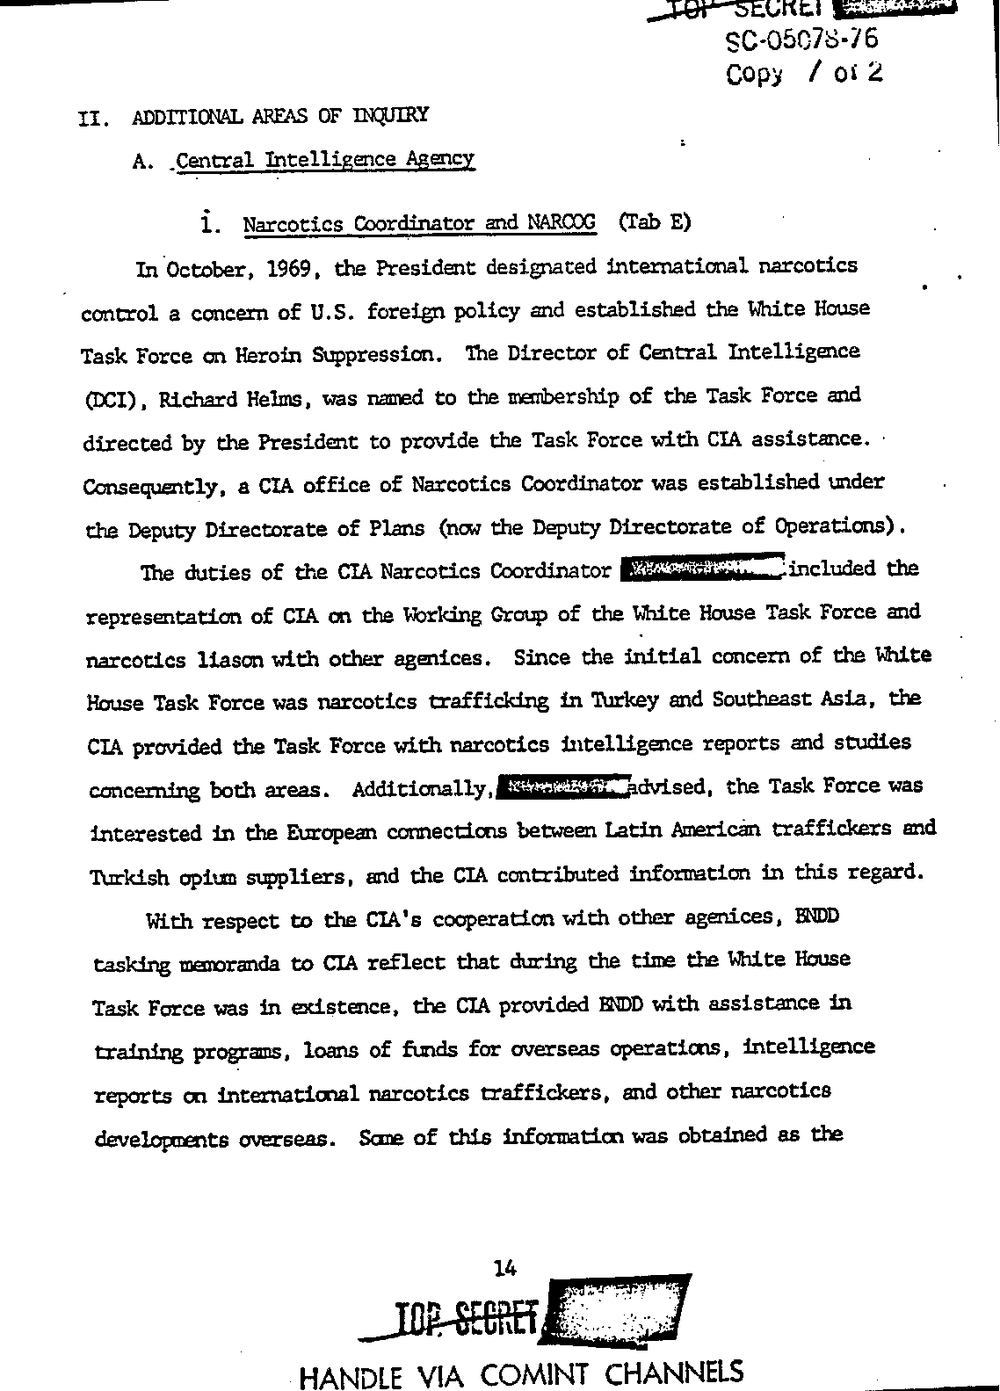 Page 22 from Report on Inquiry Into CIA Related Electronic Surveillance Activities